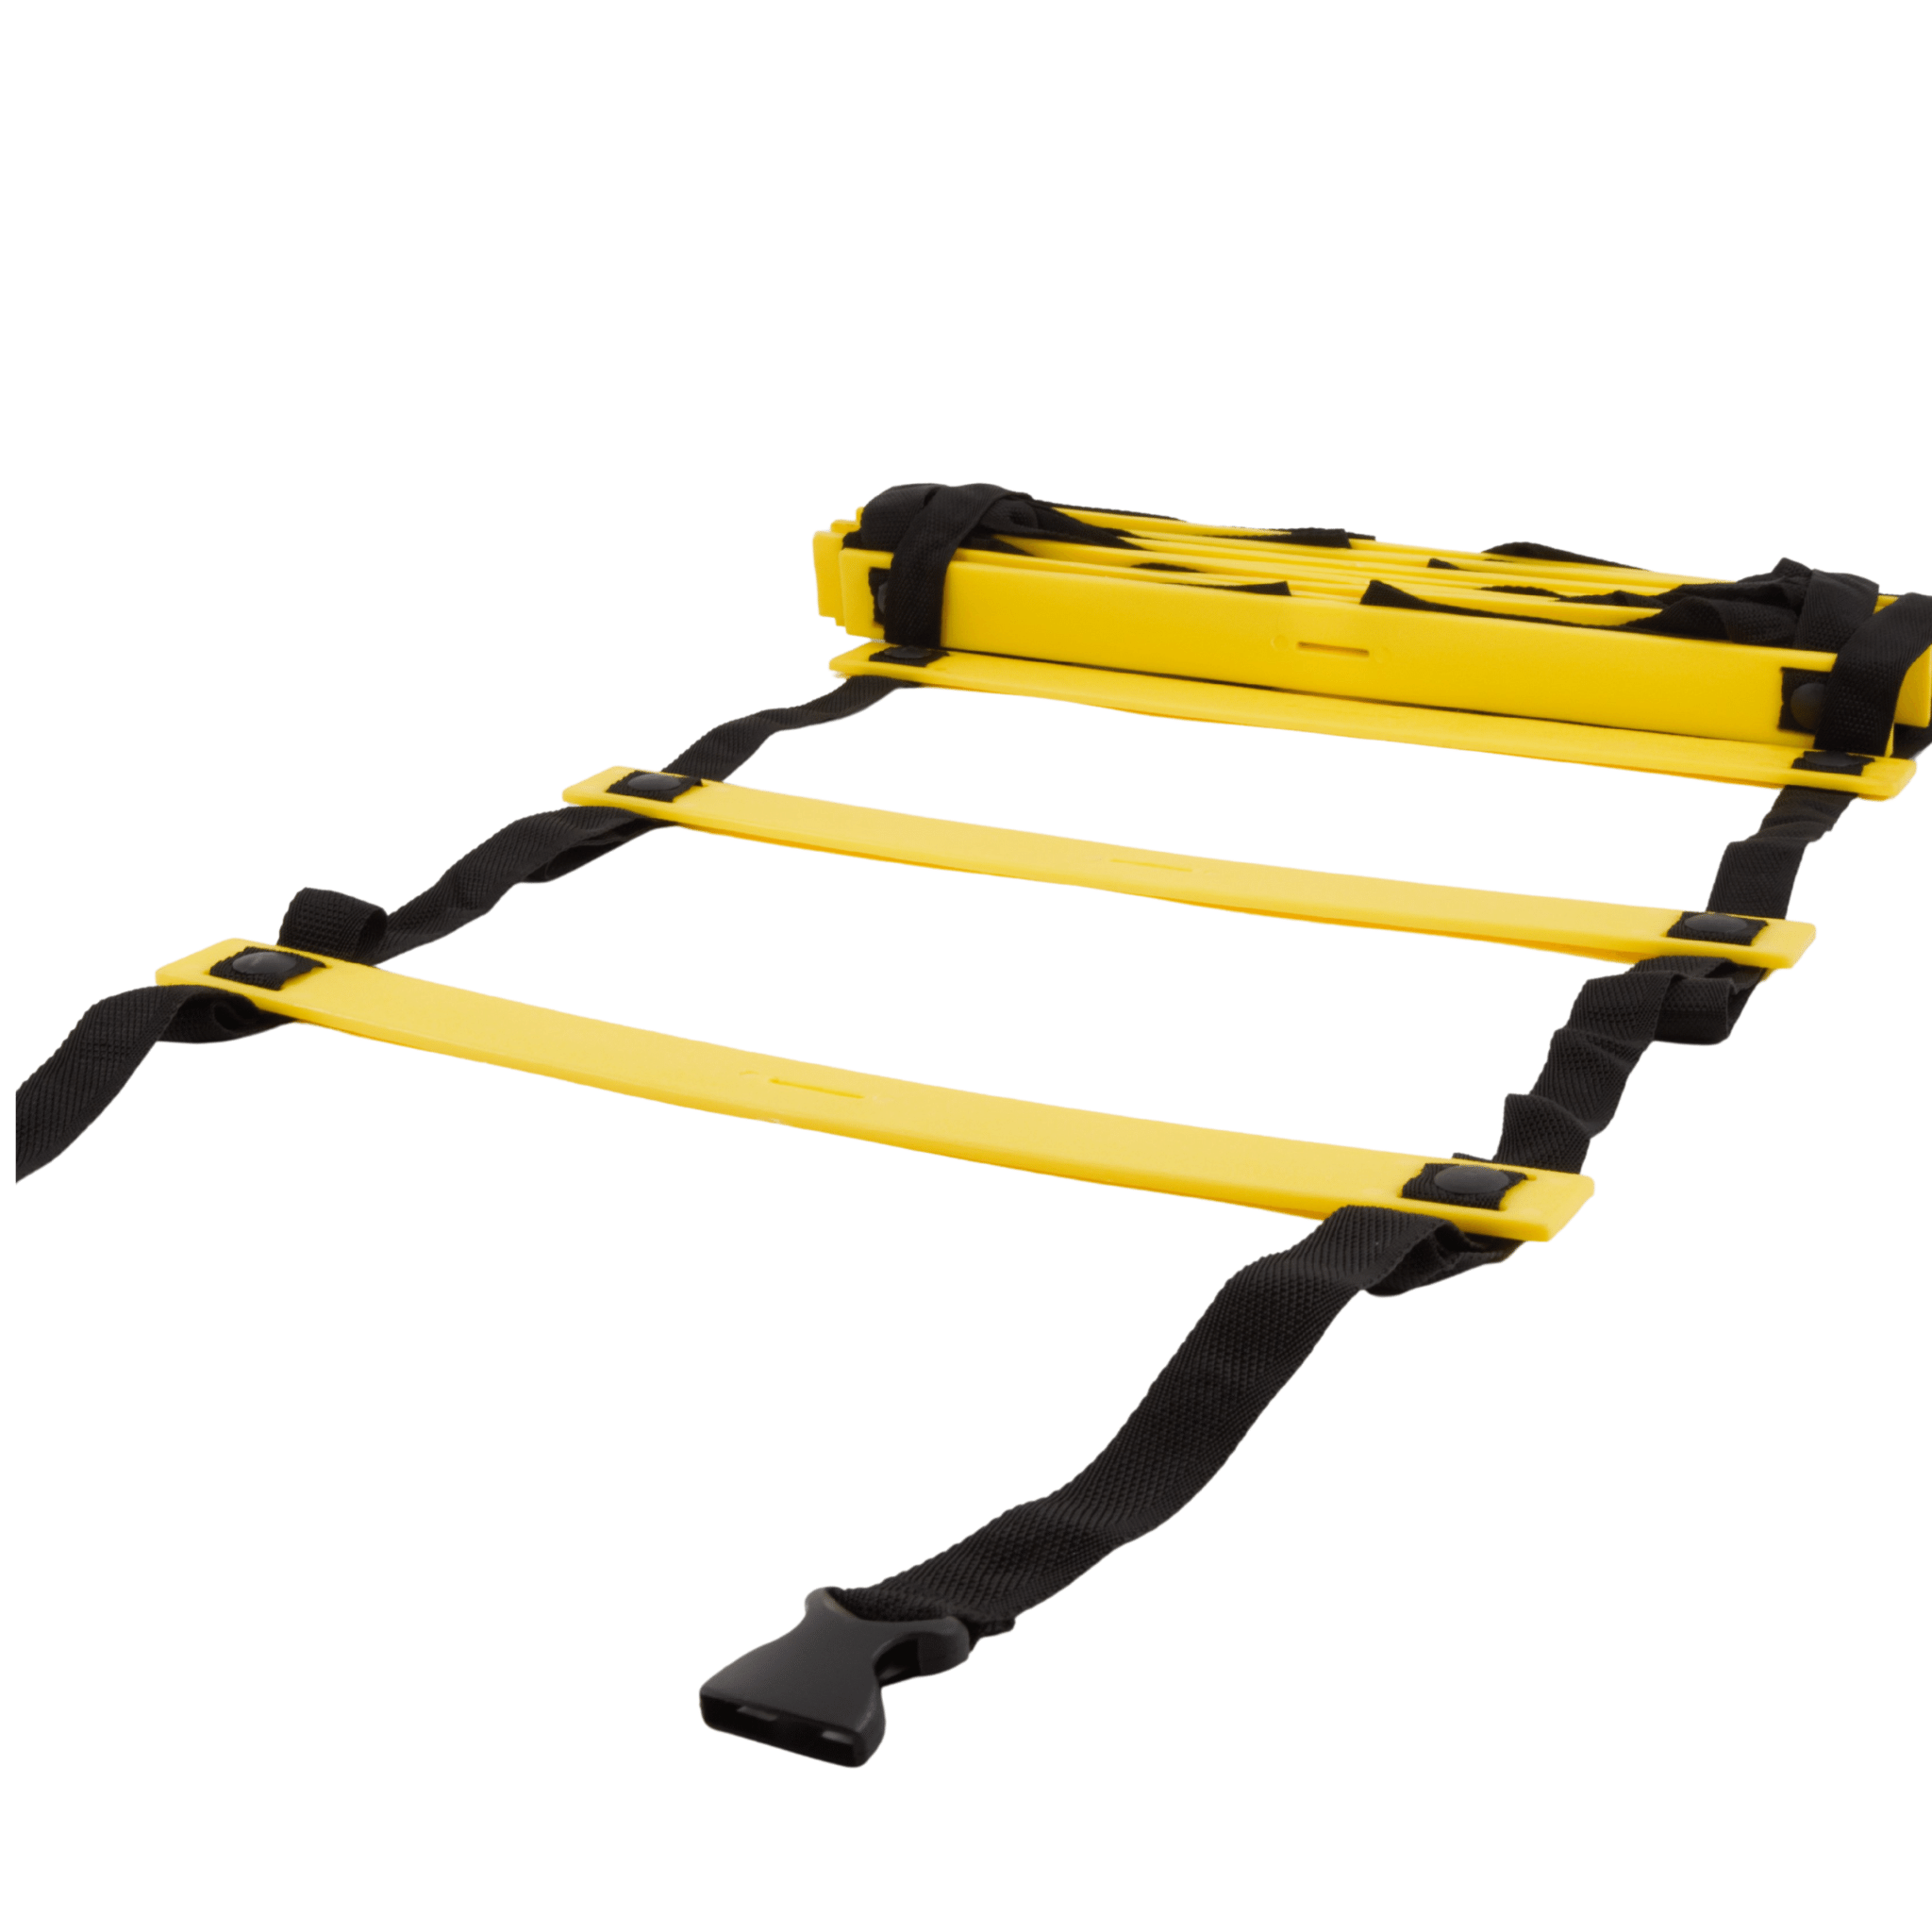 Agility Footwork Ladder | Adjustable or Fixed